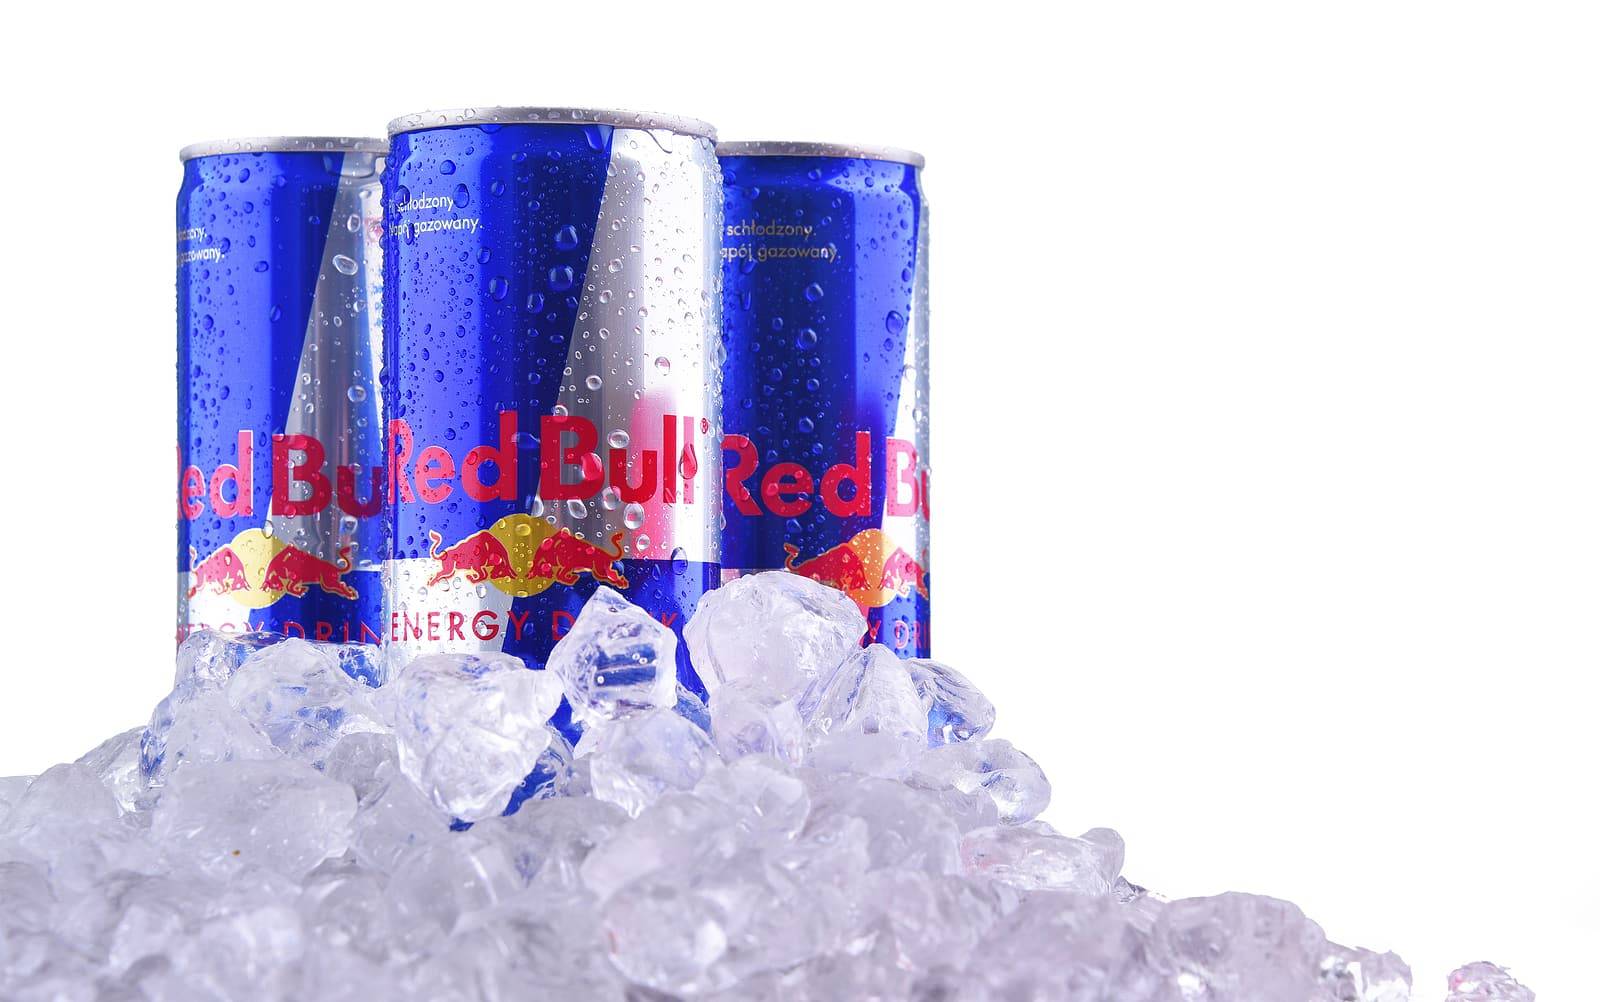 Cans of Red Bull, an energy drink